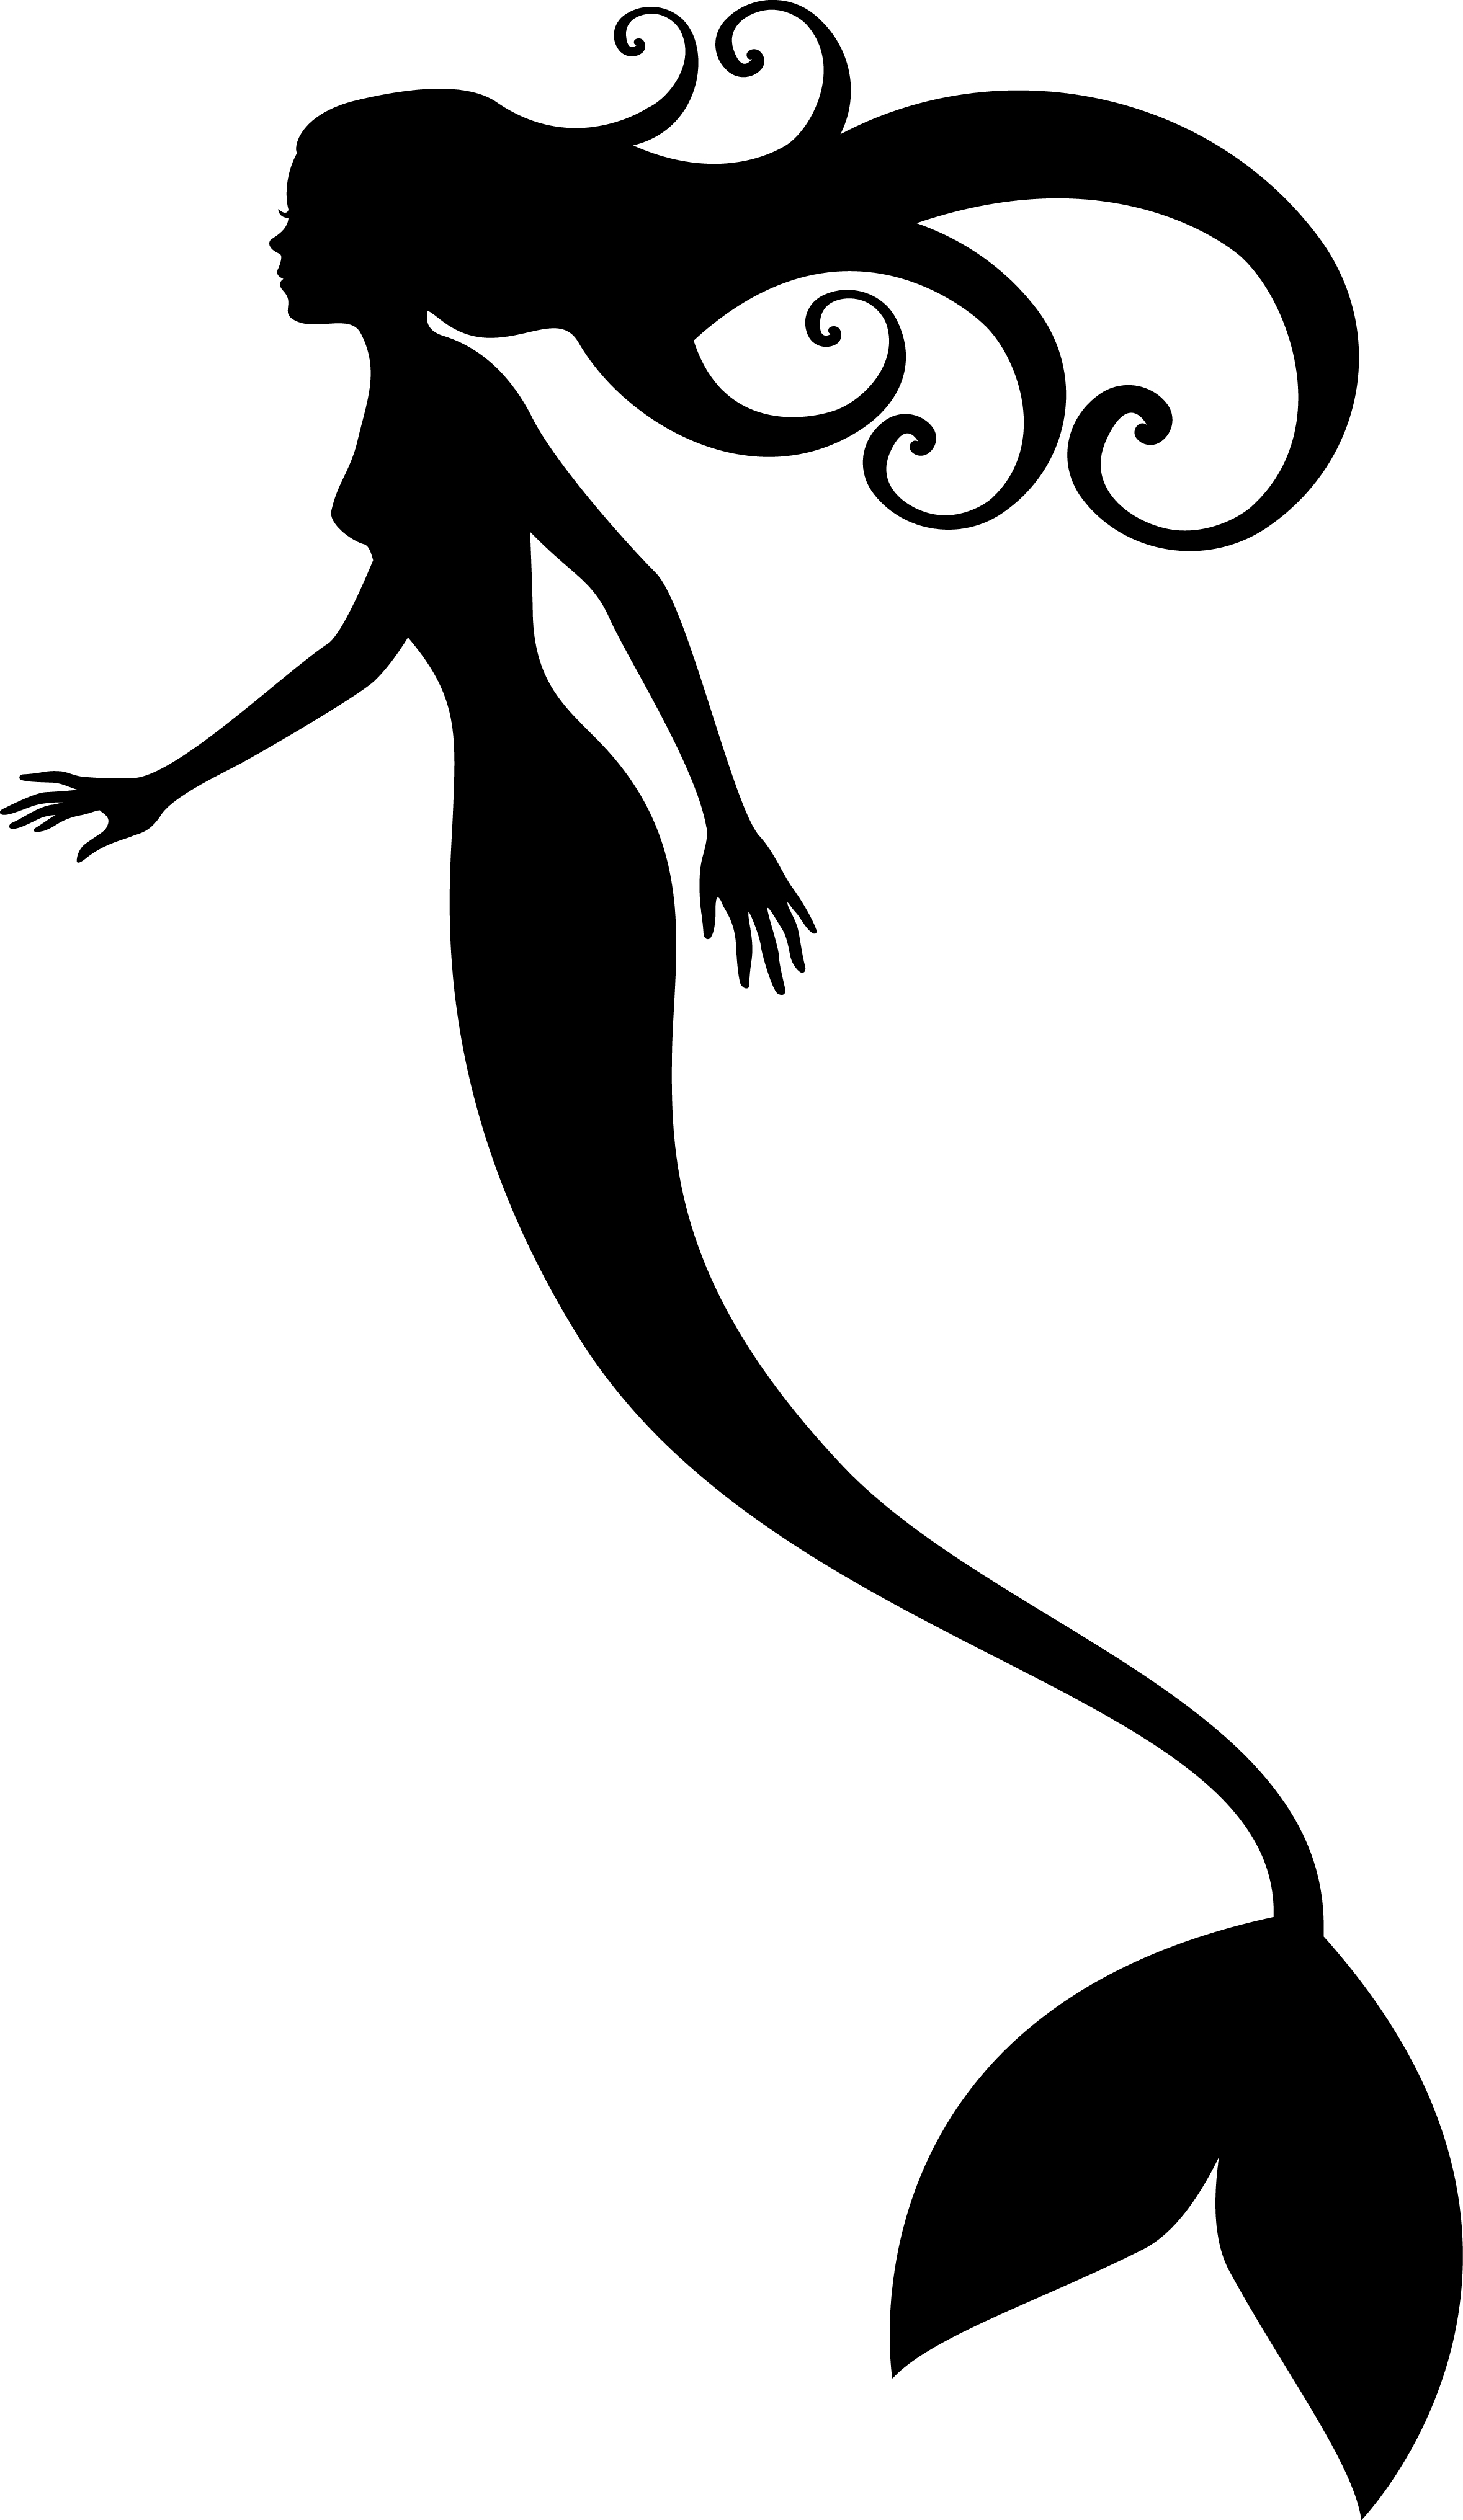 Mermaid Tail Silhouette | Clipart Panda - Free Clipart Images